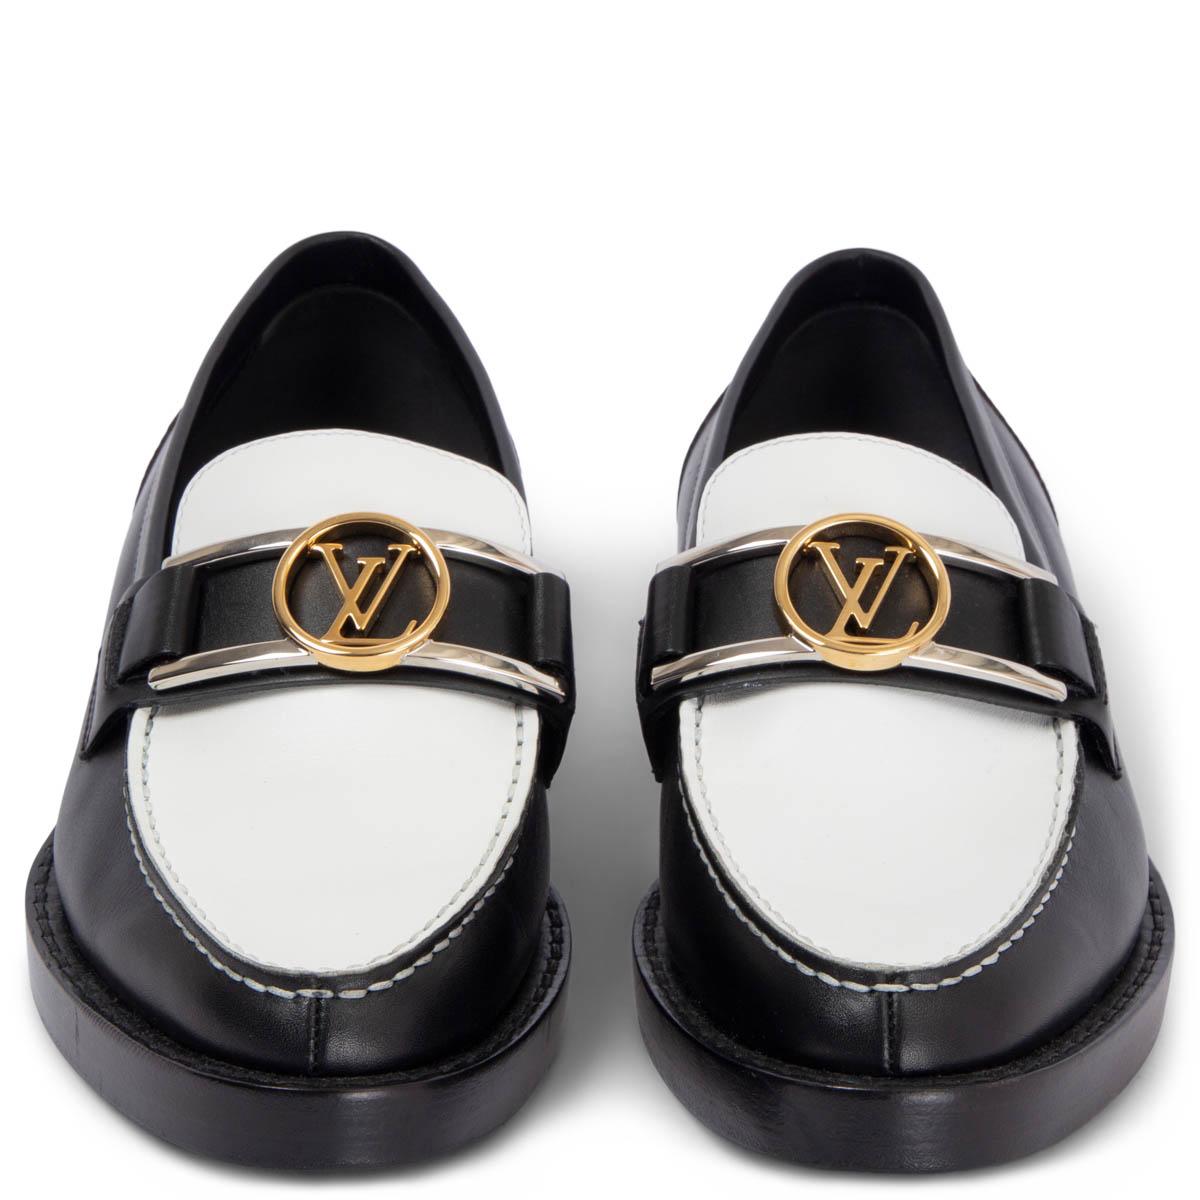 100% authentic Louis Vuitton Academy flat loafer in black and white calf leather brings a chic twist to a boyish classic. It is embellished with an LV accessory in gold- and silver-tone metal, which was inspired by the clasp of the iconic Dauphine